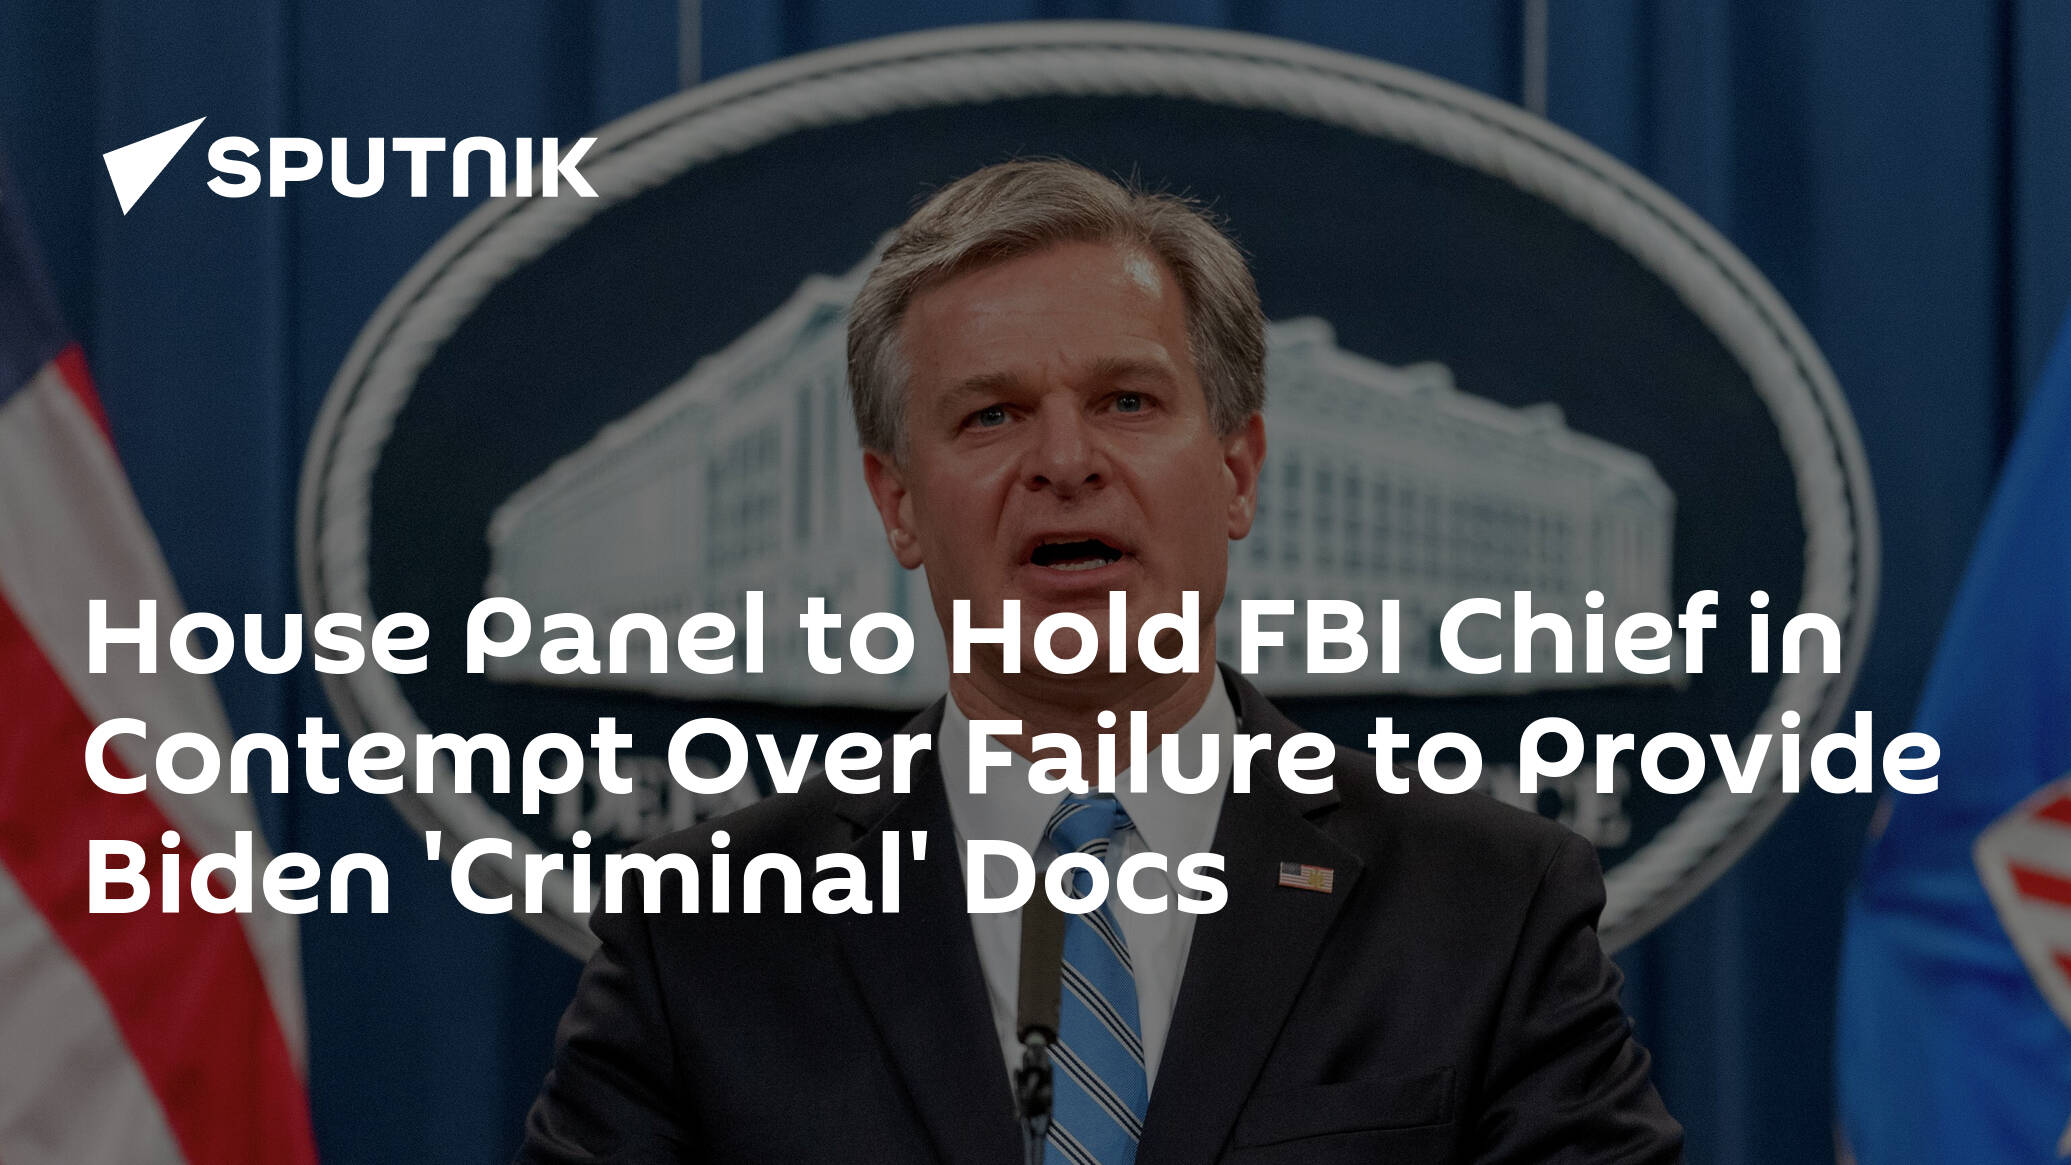 House Panel to Hold FBI Chief in Contempt Over Failure to Provide Biden 'Criminal' Docs